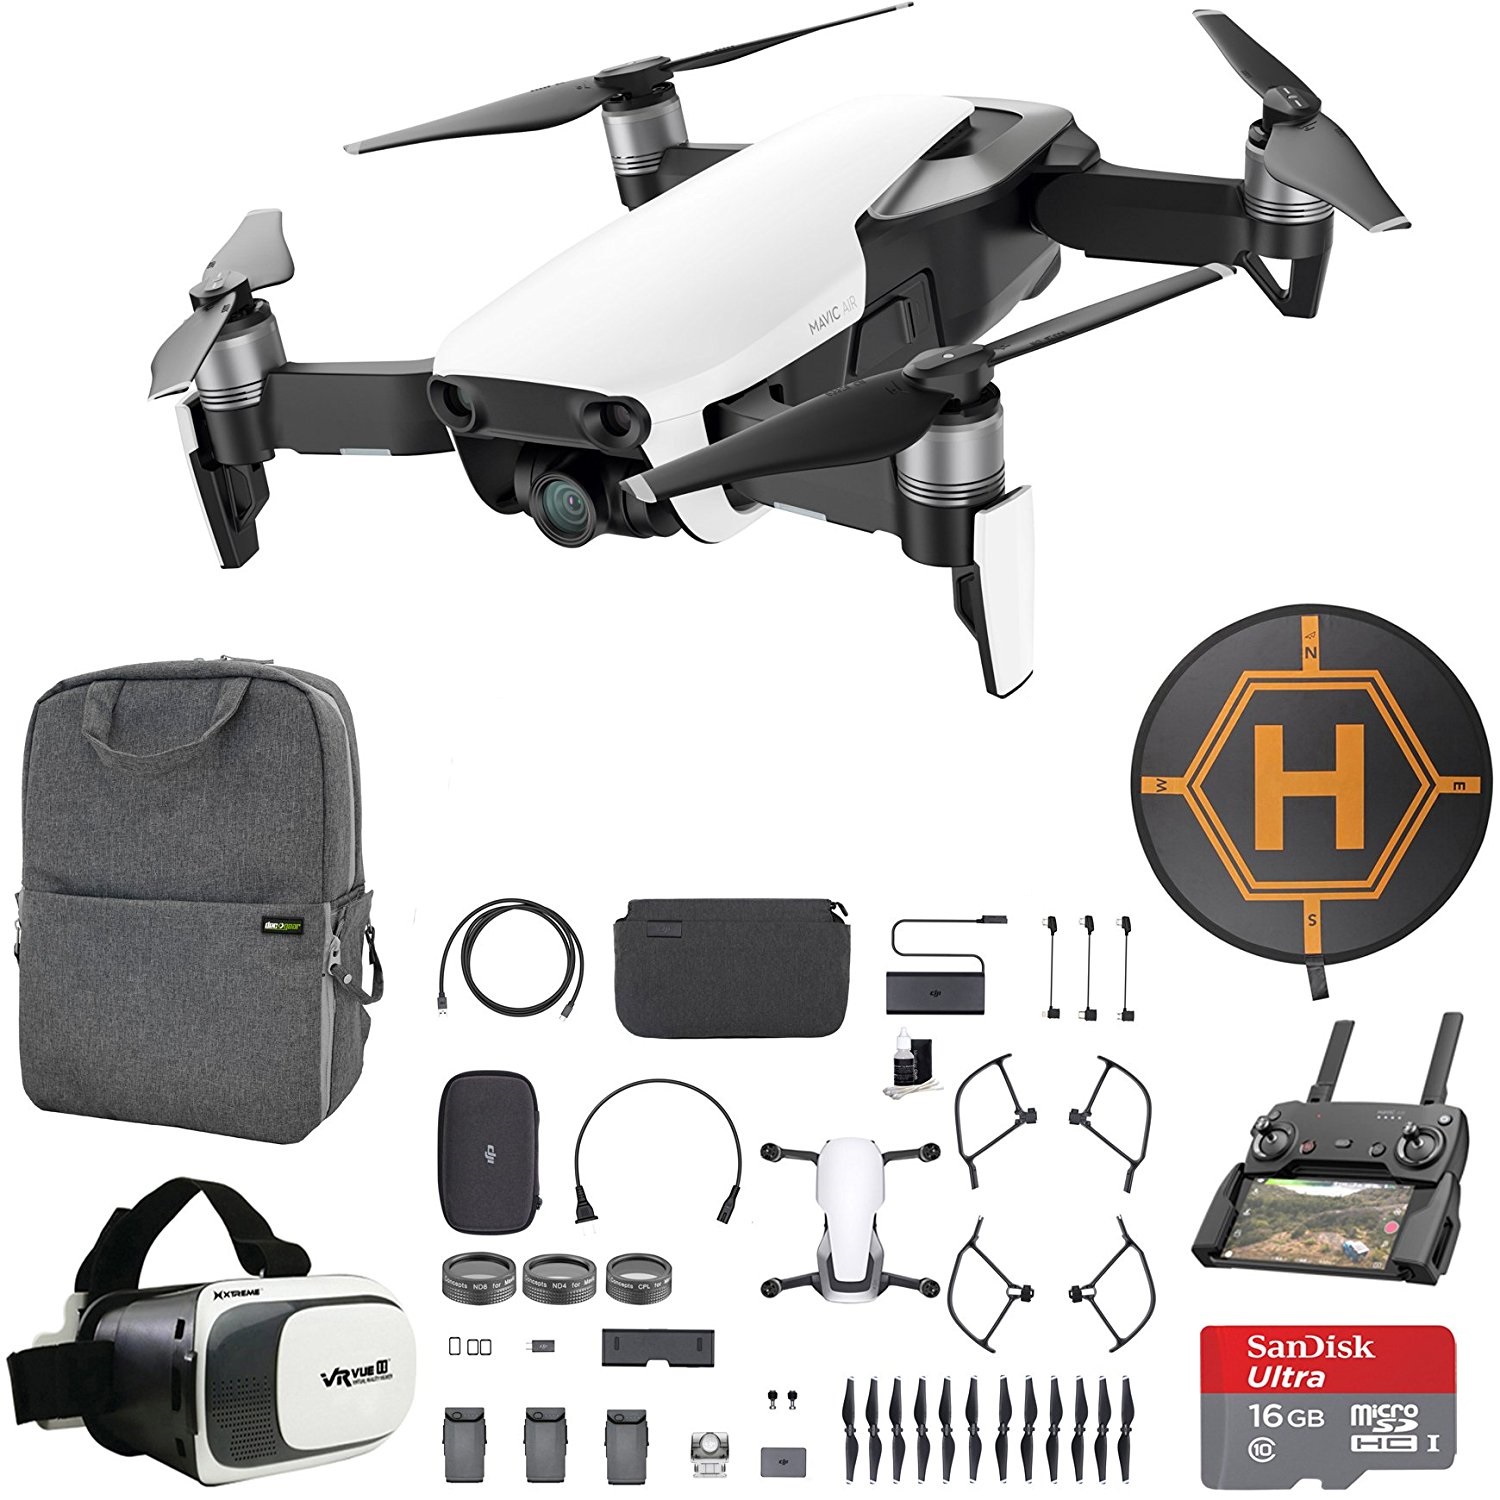 DJI Mavic Air Fly More Combo (Arctic White) Drone Combo 4K Wi-Fi Quadcopter with Remote Controller Mobile Go Bundle with Backpack VR Goggles Landing Pad 16GB microSDHC Card HD Filter Kit 